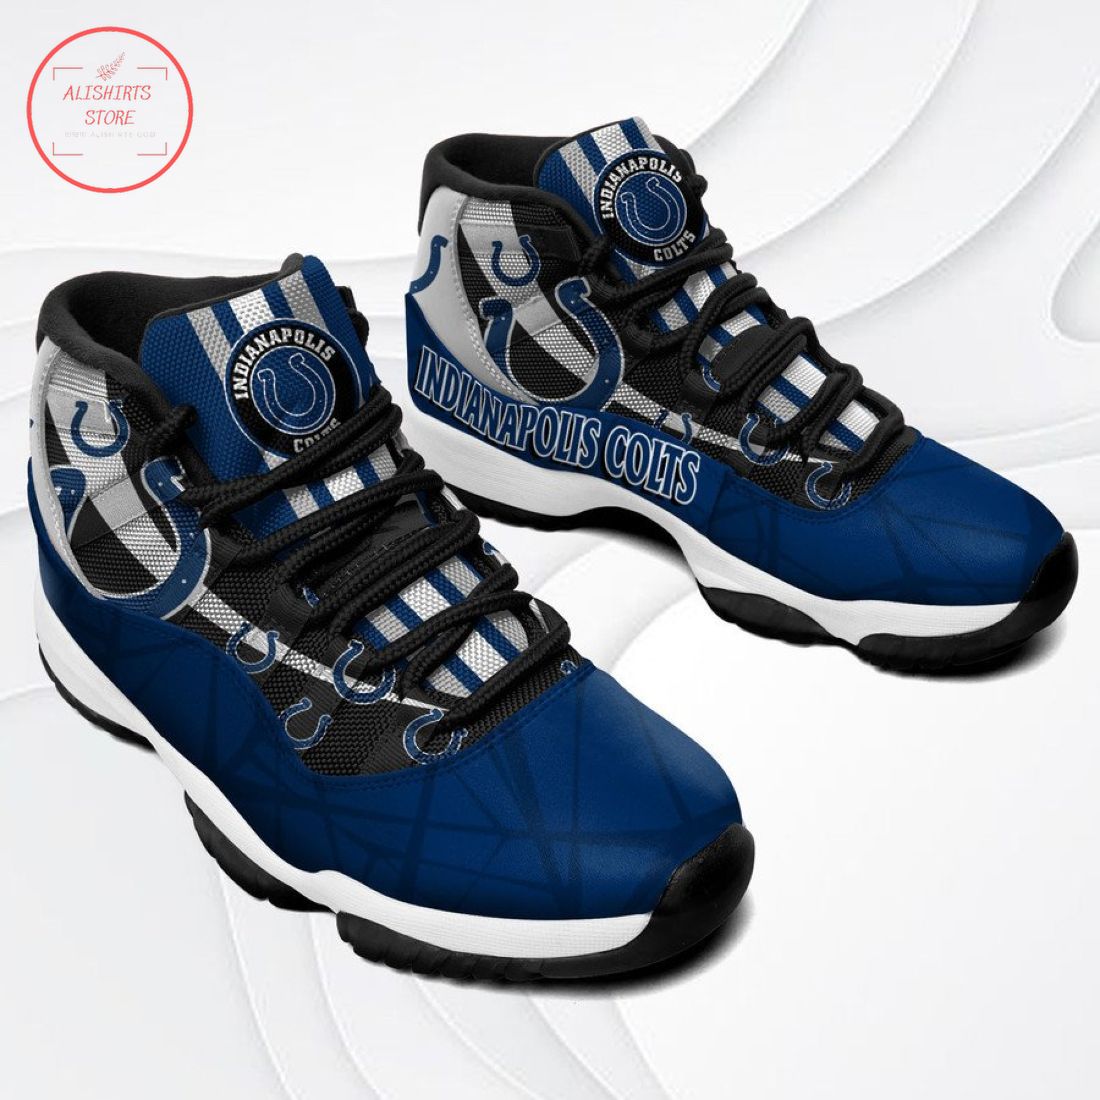 NFL Indianapolis Colts New Air Jordan 11 Sneakers Shoes